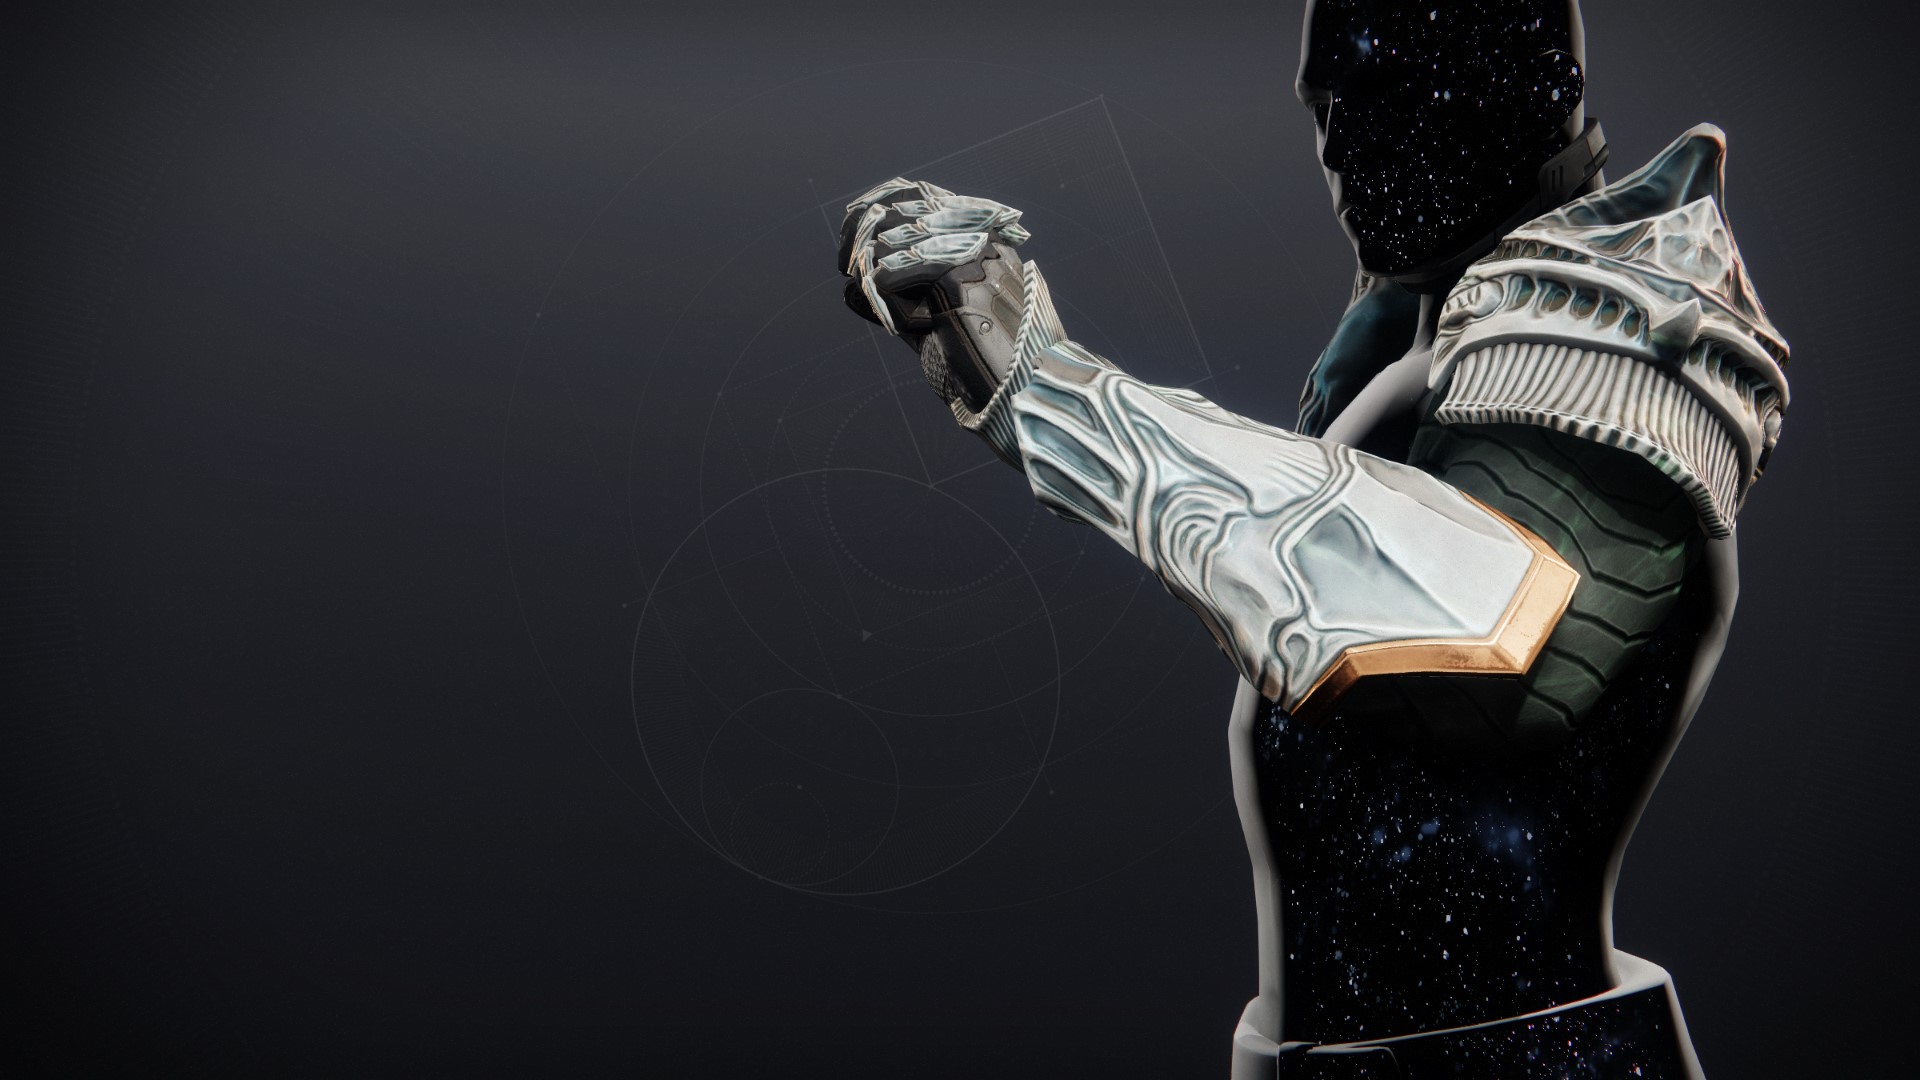 An in-game render of the Grasps of the Taken King.